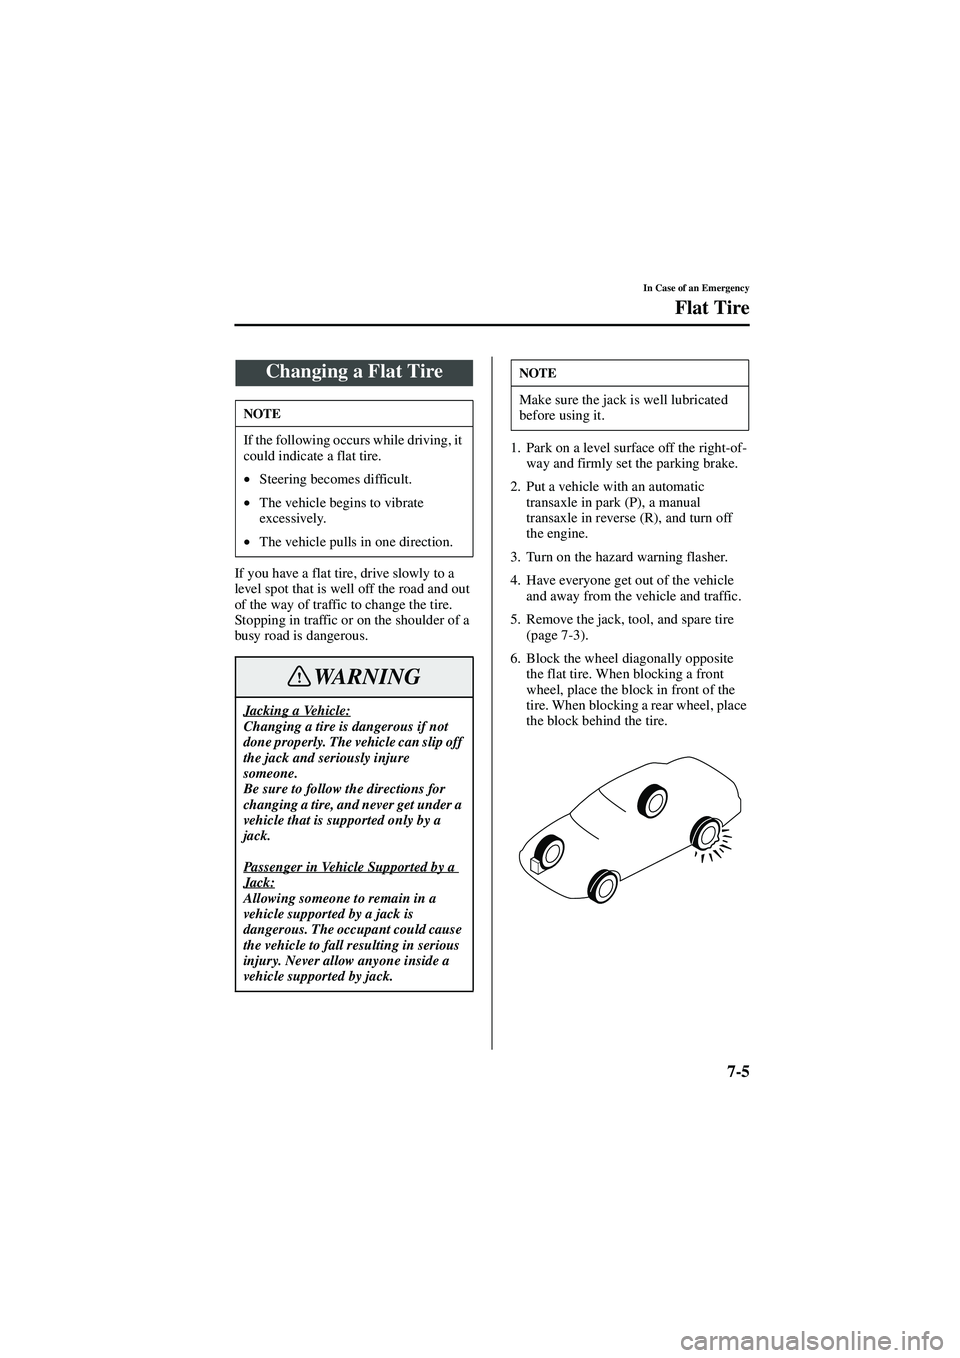 MAZDA MODEL 626 2002  Owners Manual 7-5
In Case of an Emergency
Flat Tire
Form No. 8Q50-EA-01G
If you have a flat tire, drive slowly to a 
level spot that is well off the road and out 
of the way of traffic to change the tire.
Stopping 